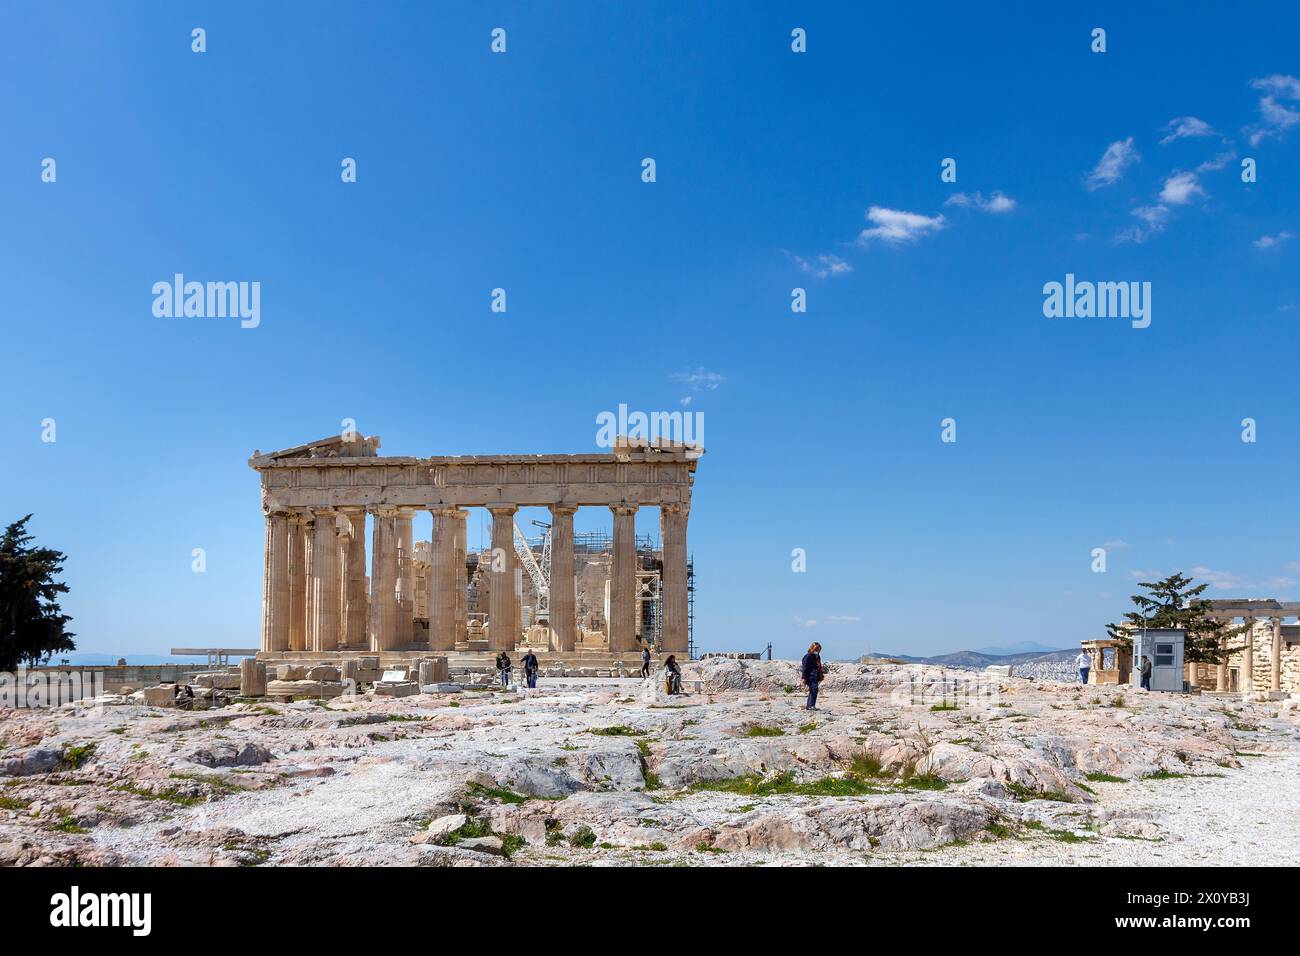 Parthenon, the most emblematic ancient temple in Athens, Greece, a symbol of culture and democracy all across the world. Stock Photo